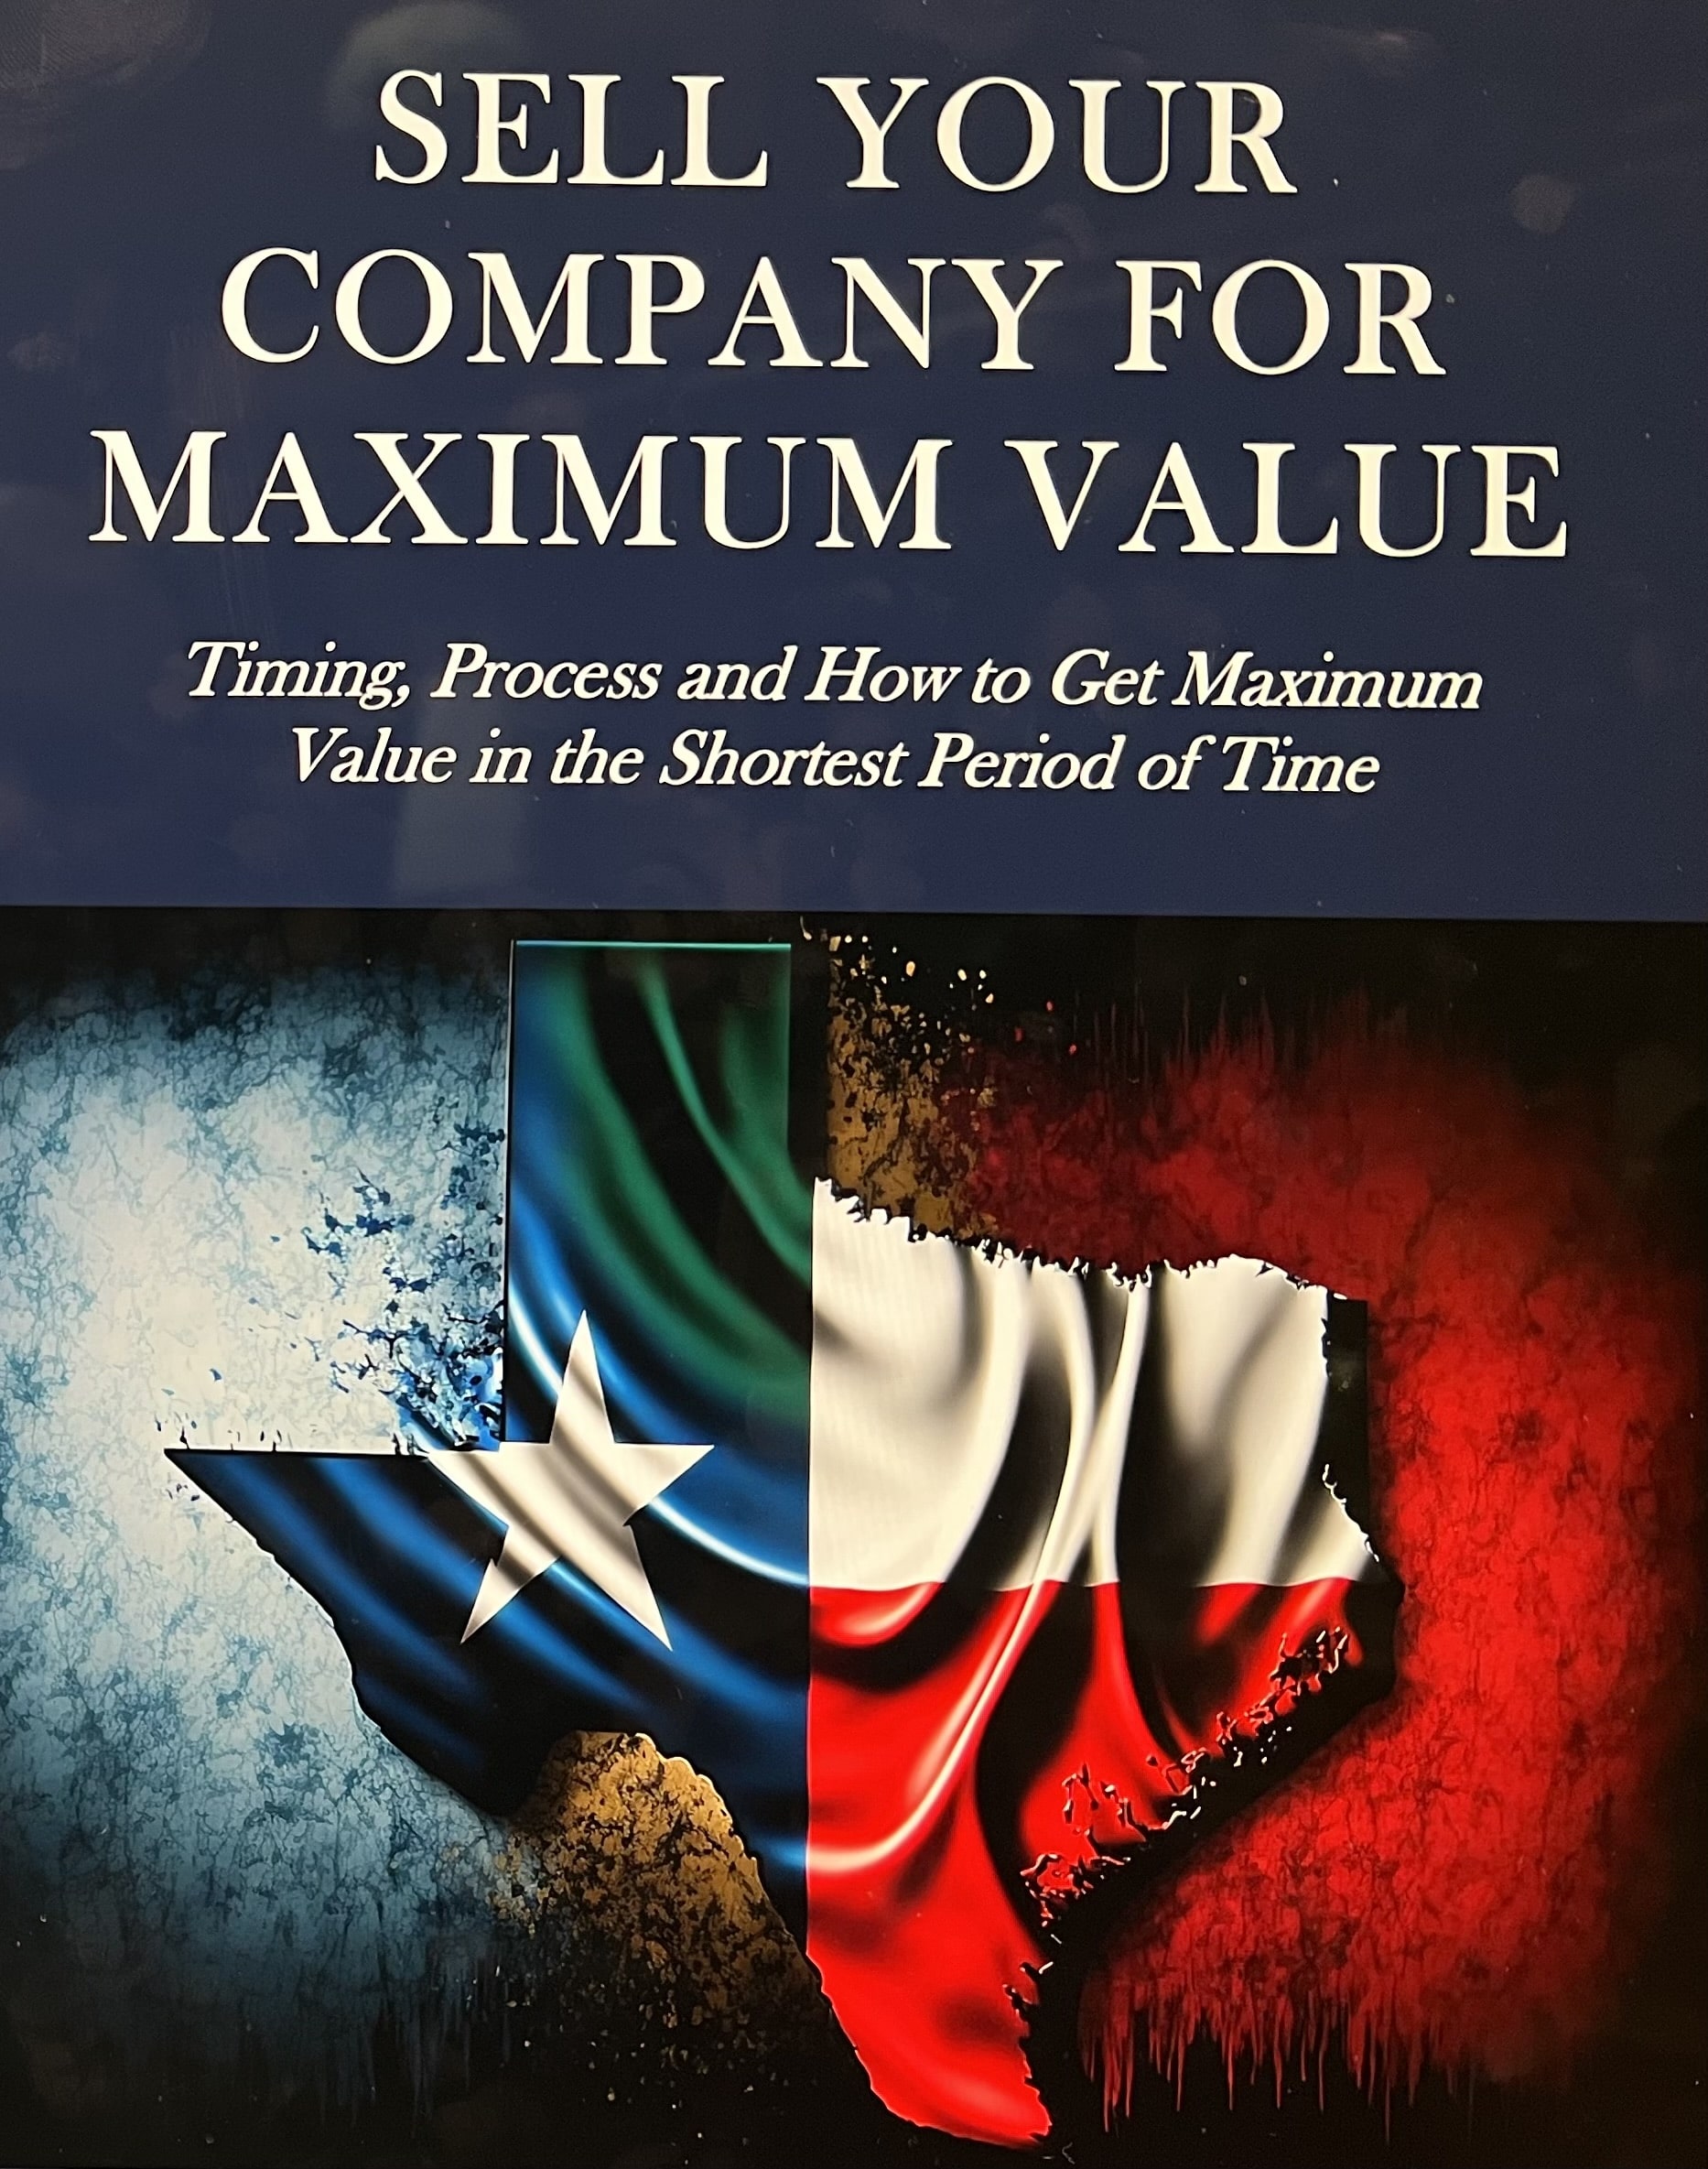 Sell Your Company for Maximum Value